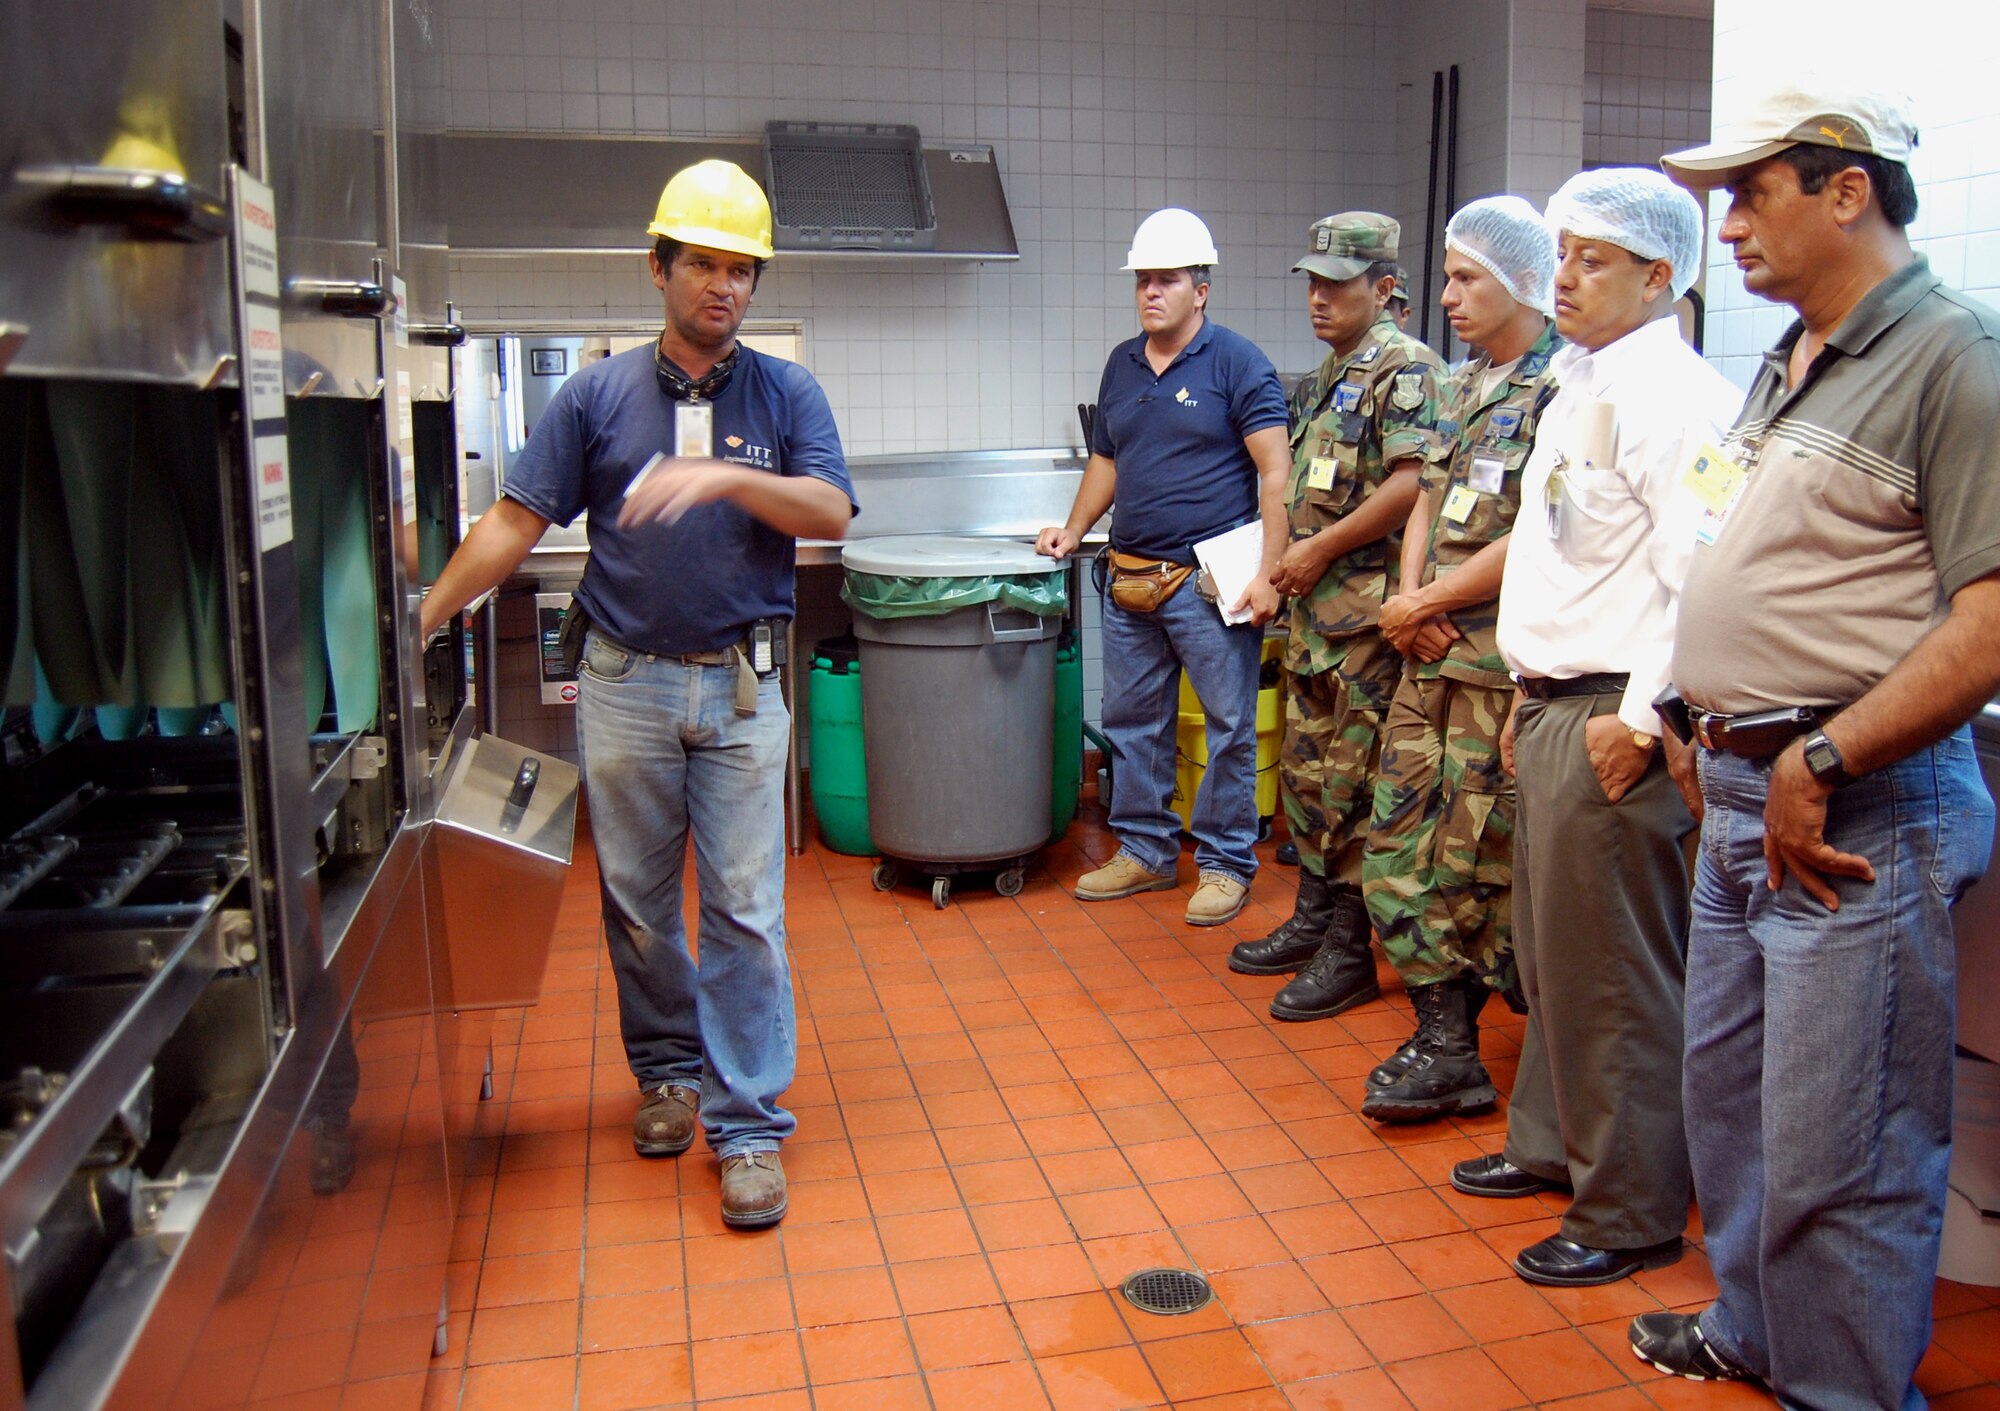 Mr. Pedro Loor (far left), contract employee with ITT civil engineering, explains safety issues in the FOL Manta dining facility to government of Ecuador personnel June 3 during an orientation. (U.S. Air Force photo by 1st Lt. Beth Woodward)